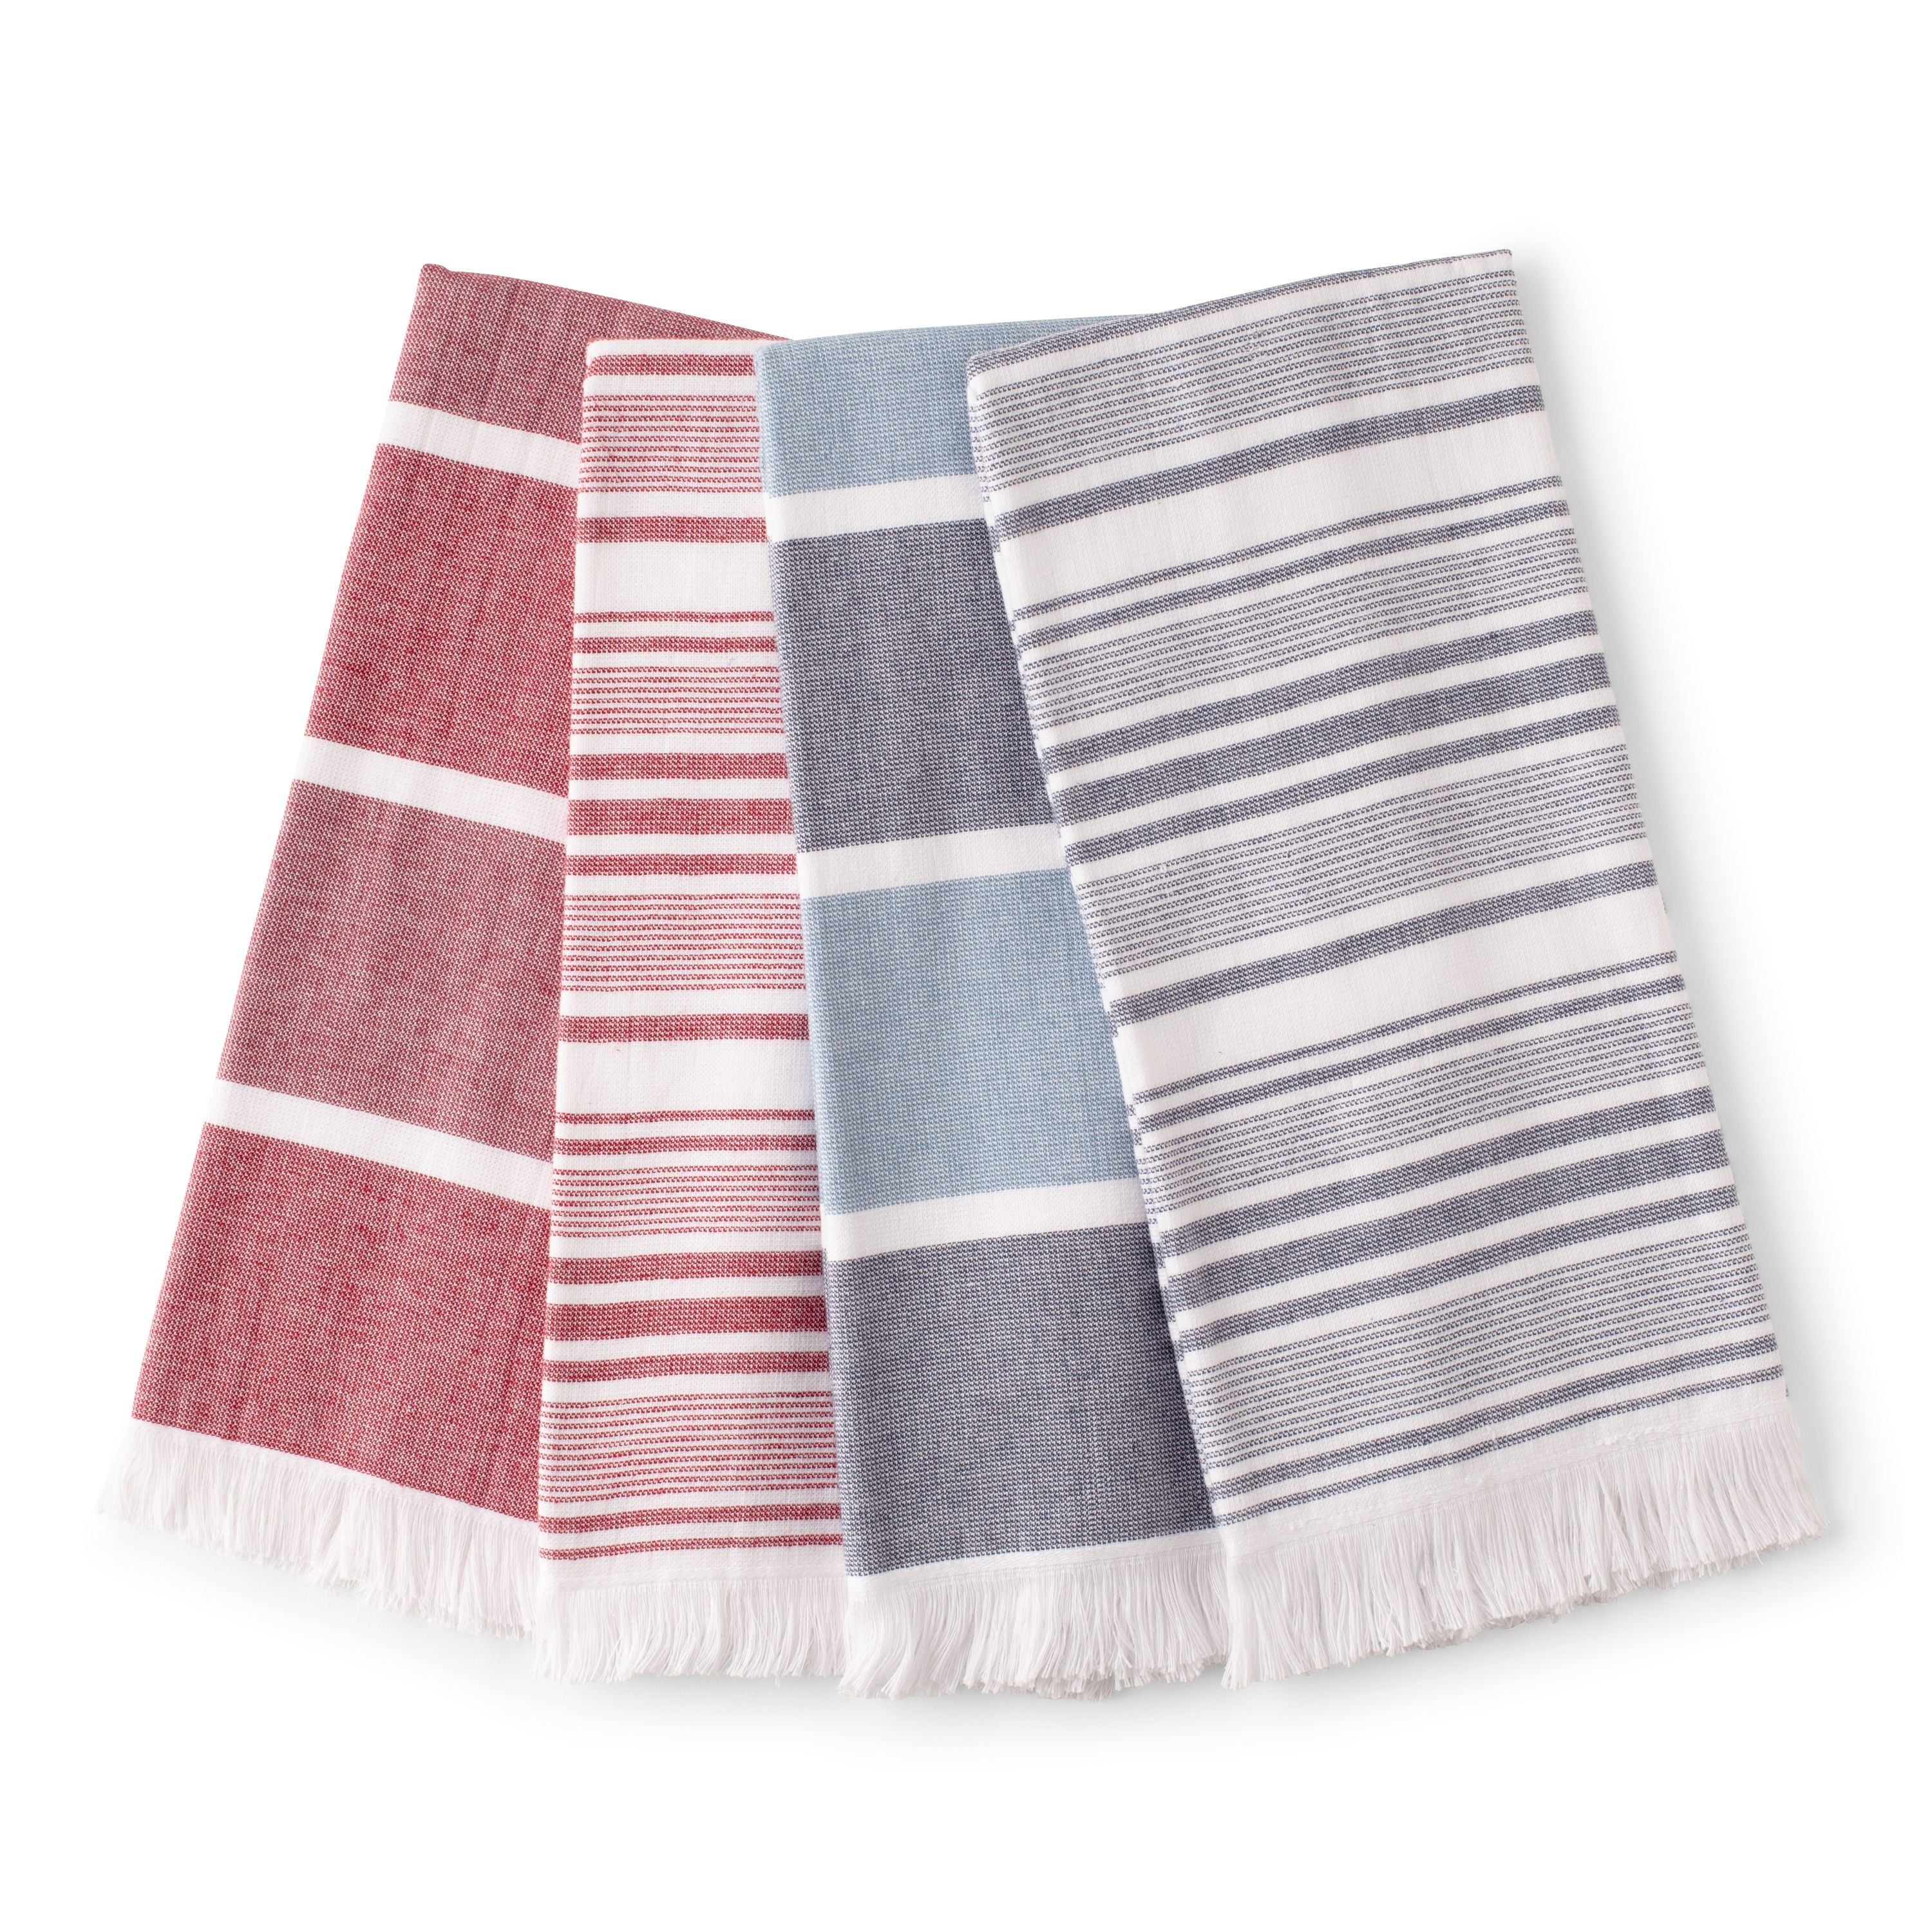 Better Homes & Gardens, 4 Pack, Fringe Kitchen Towel Set, Red and Washed Indiego | Walmart (US)